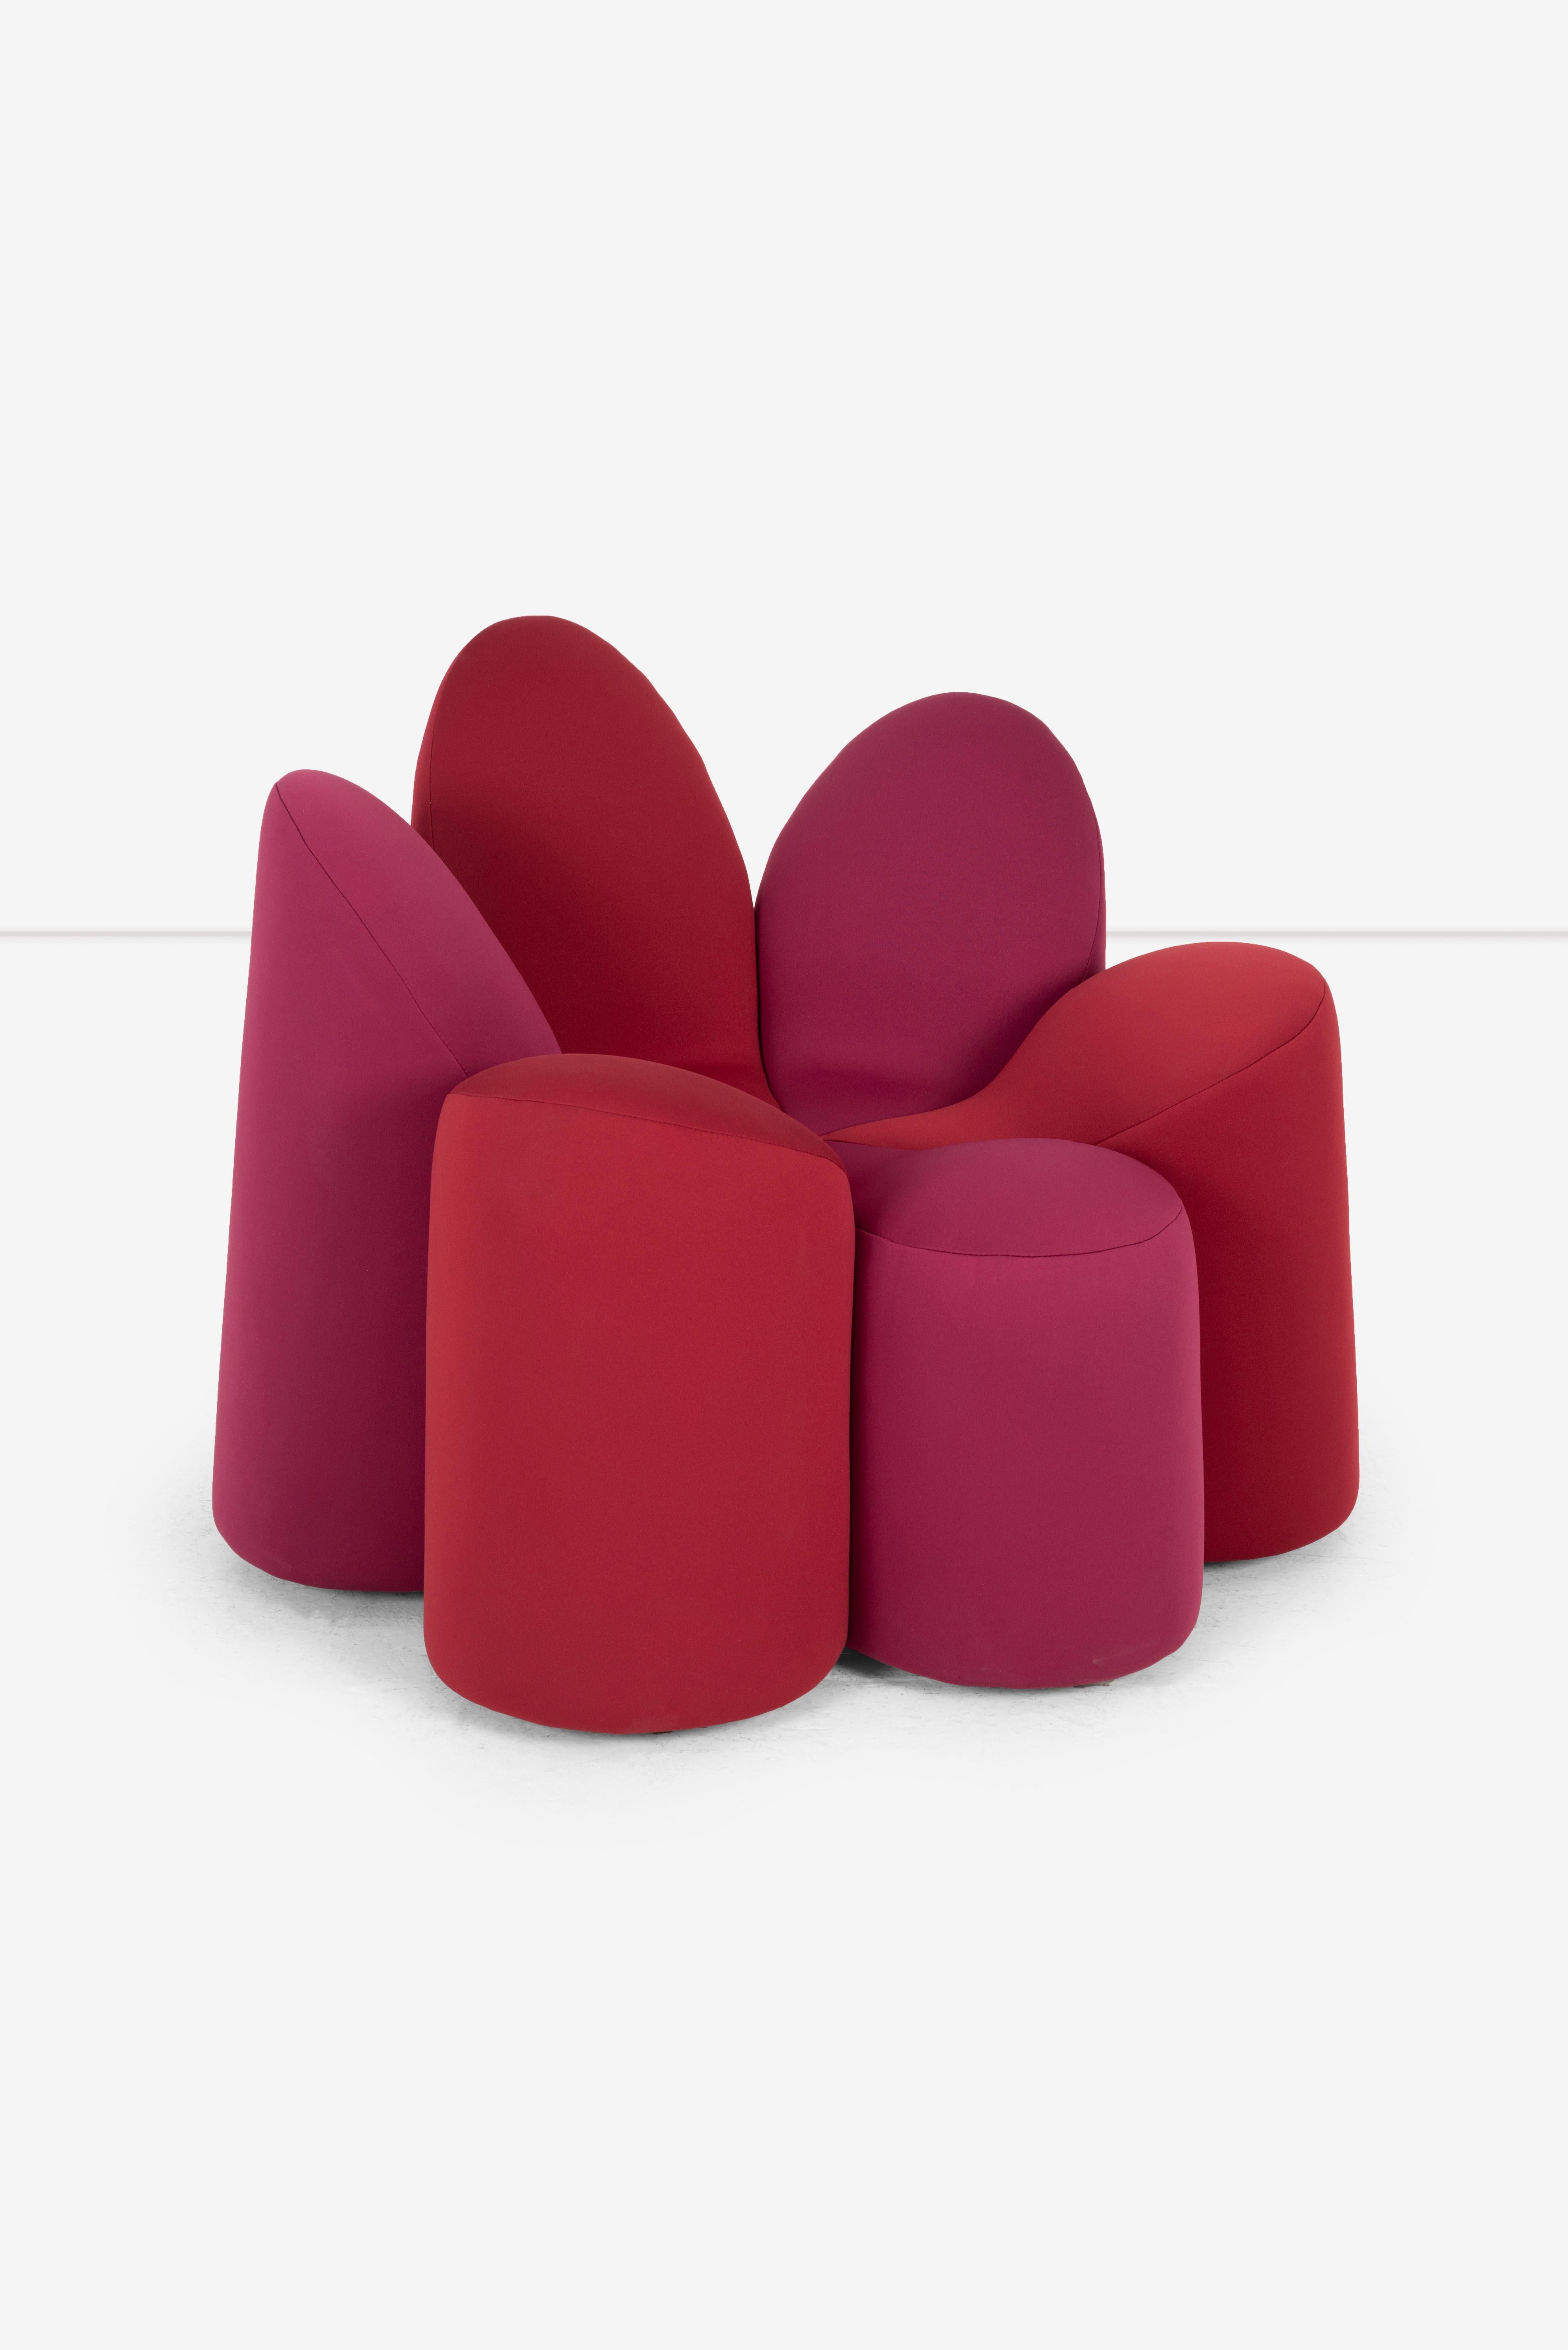 French Mayflower Chair by Fabrice Berrux for Roche Bobois For Sale